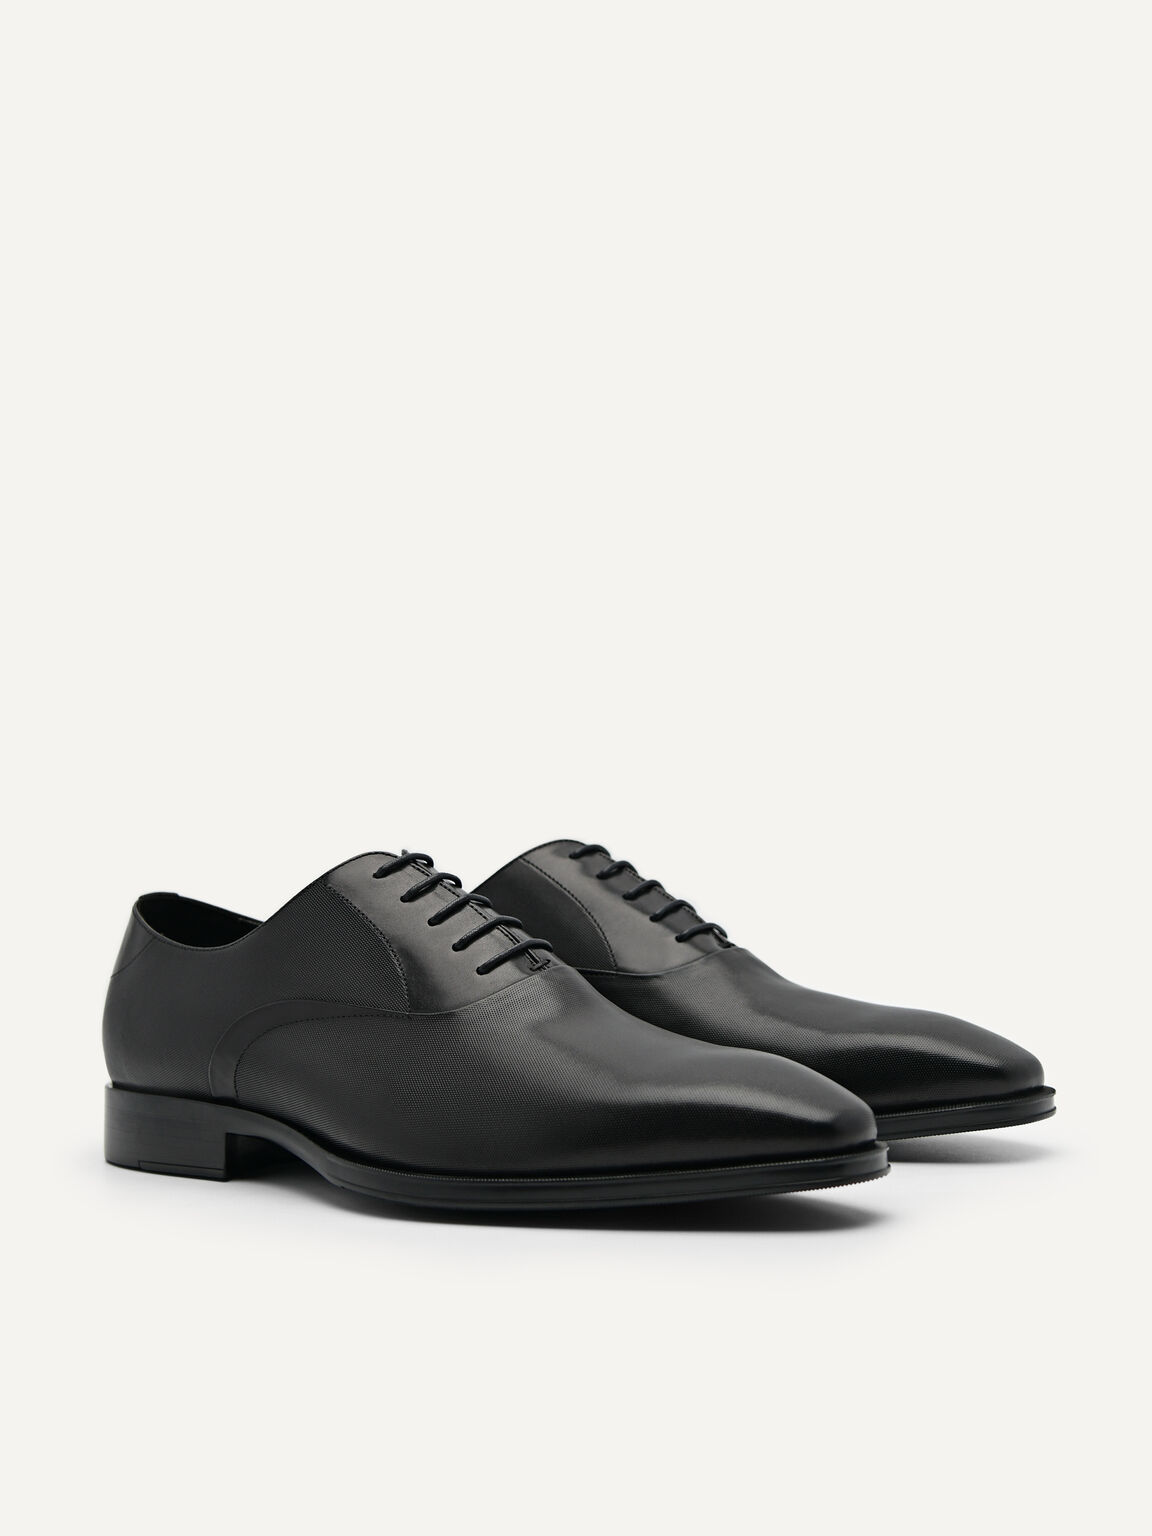 Holly Leather Oxford Shoes, Black